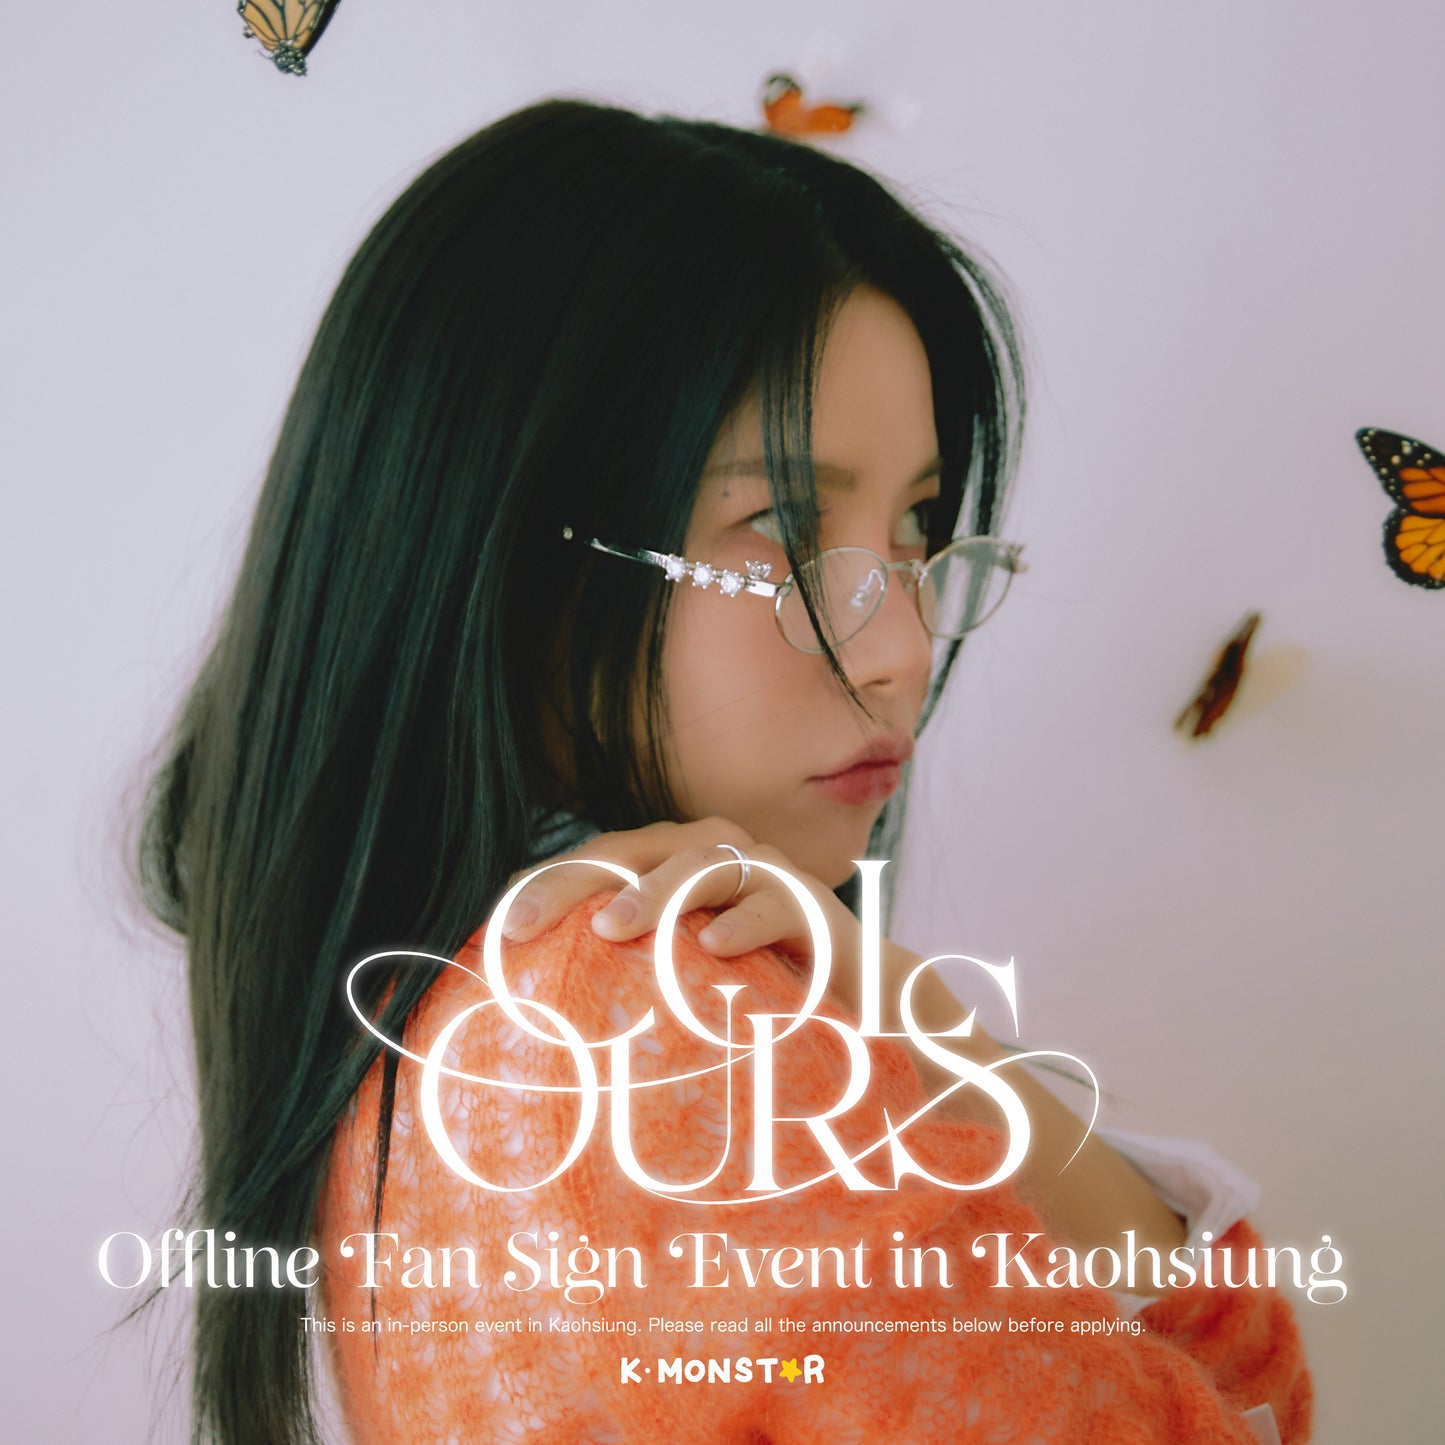 MAMAMOO+ | Solar - COLOURS [OFFLINE FAN SIGN EVENT - KAOHSIUNG]